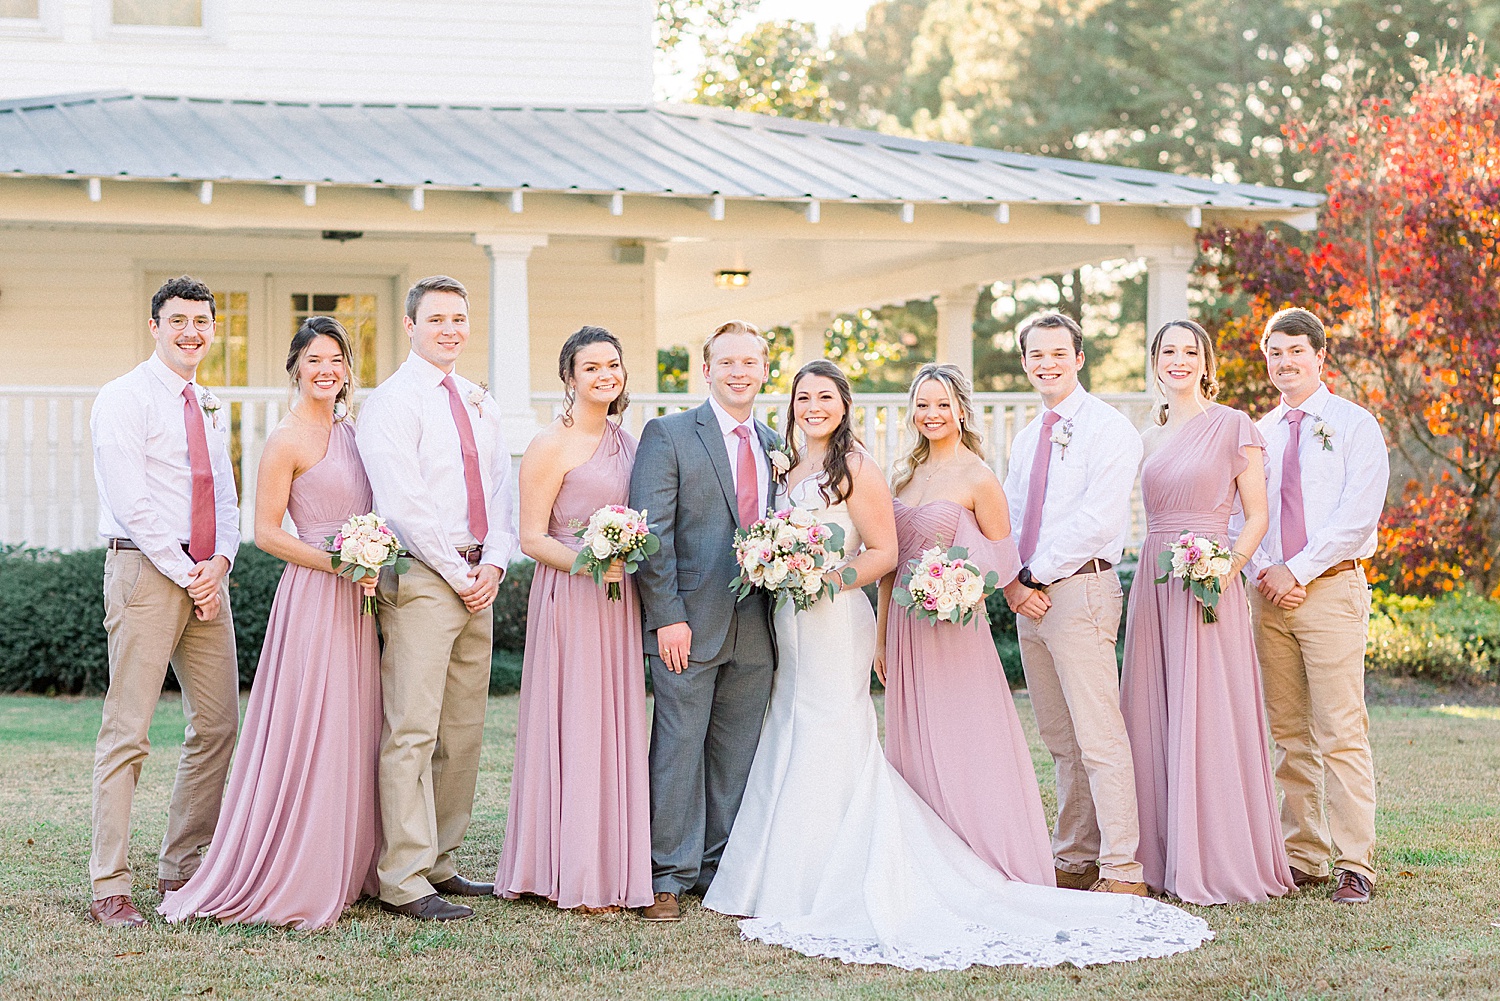 newlyweds stand with their bridal party outside wedding venue